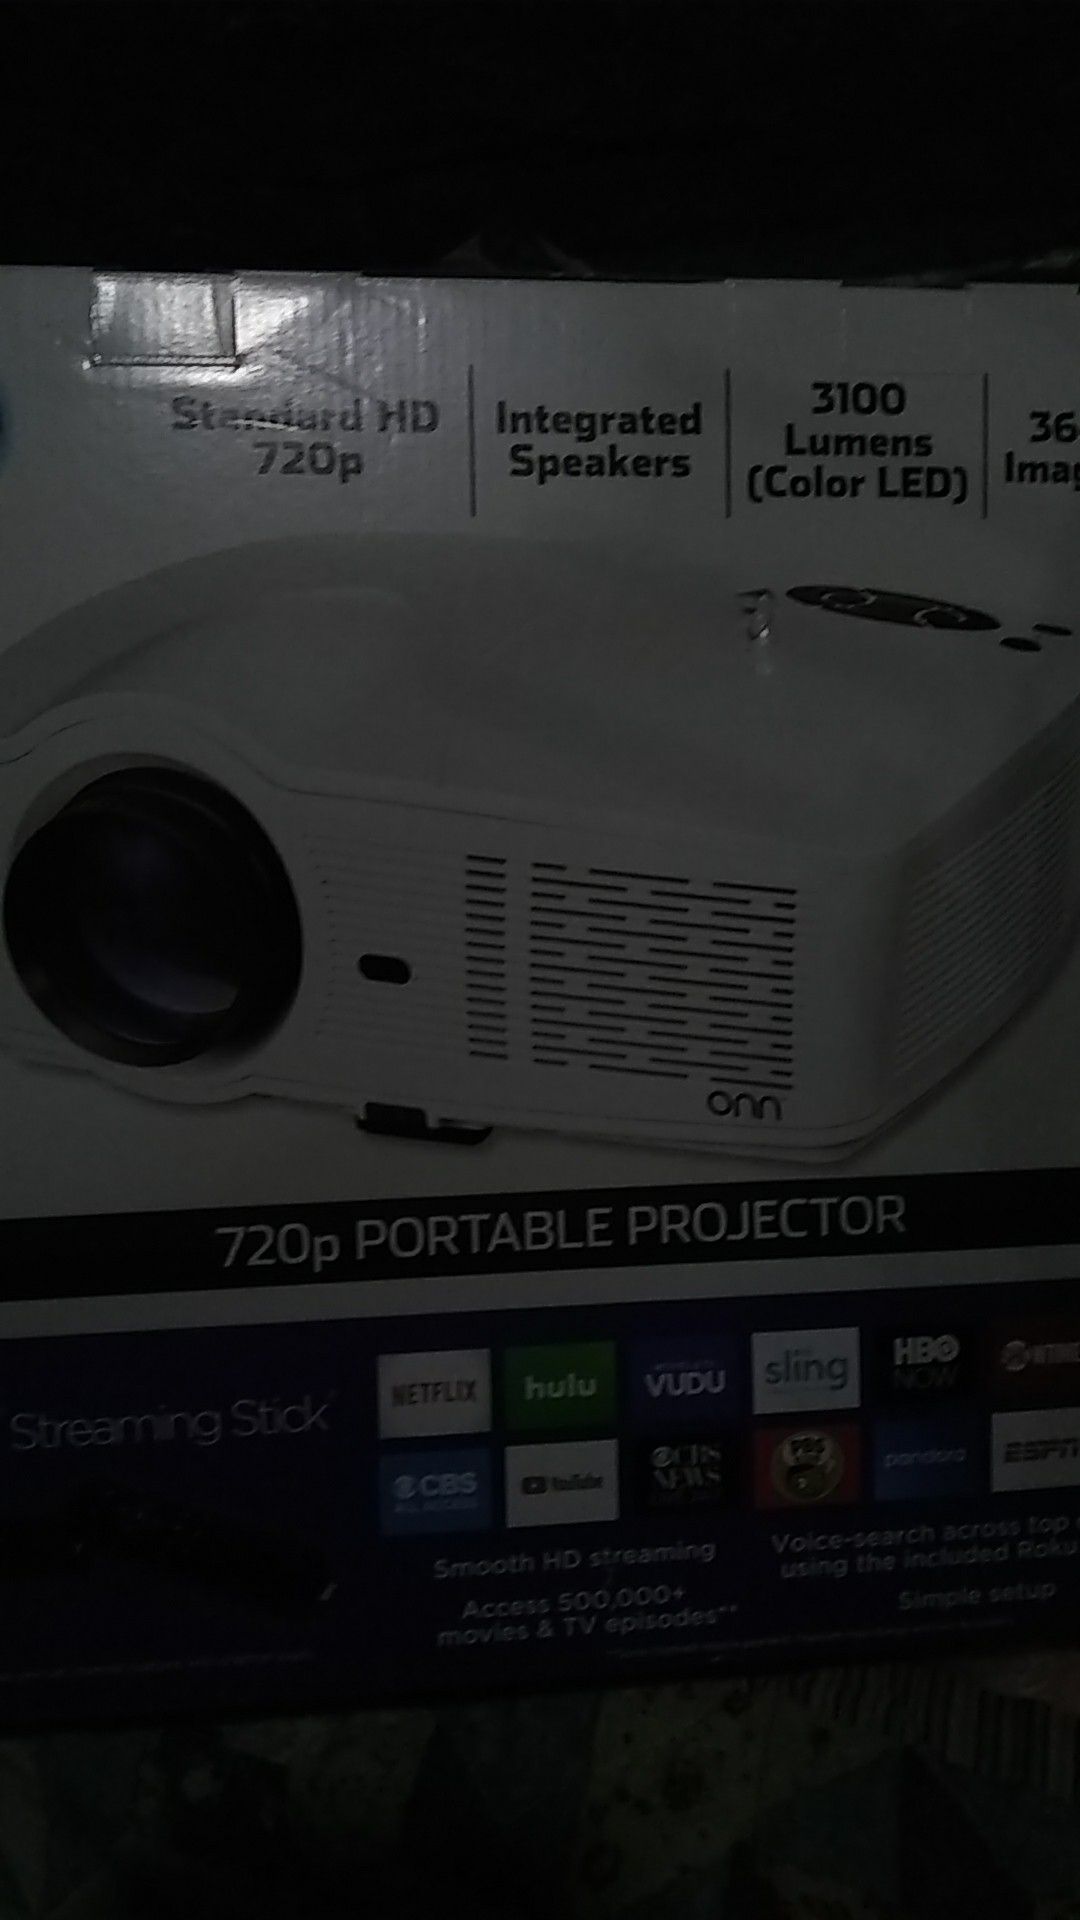 Onn 720p portable projector includes Roku streaming stick